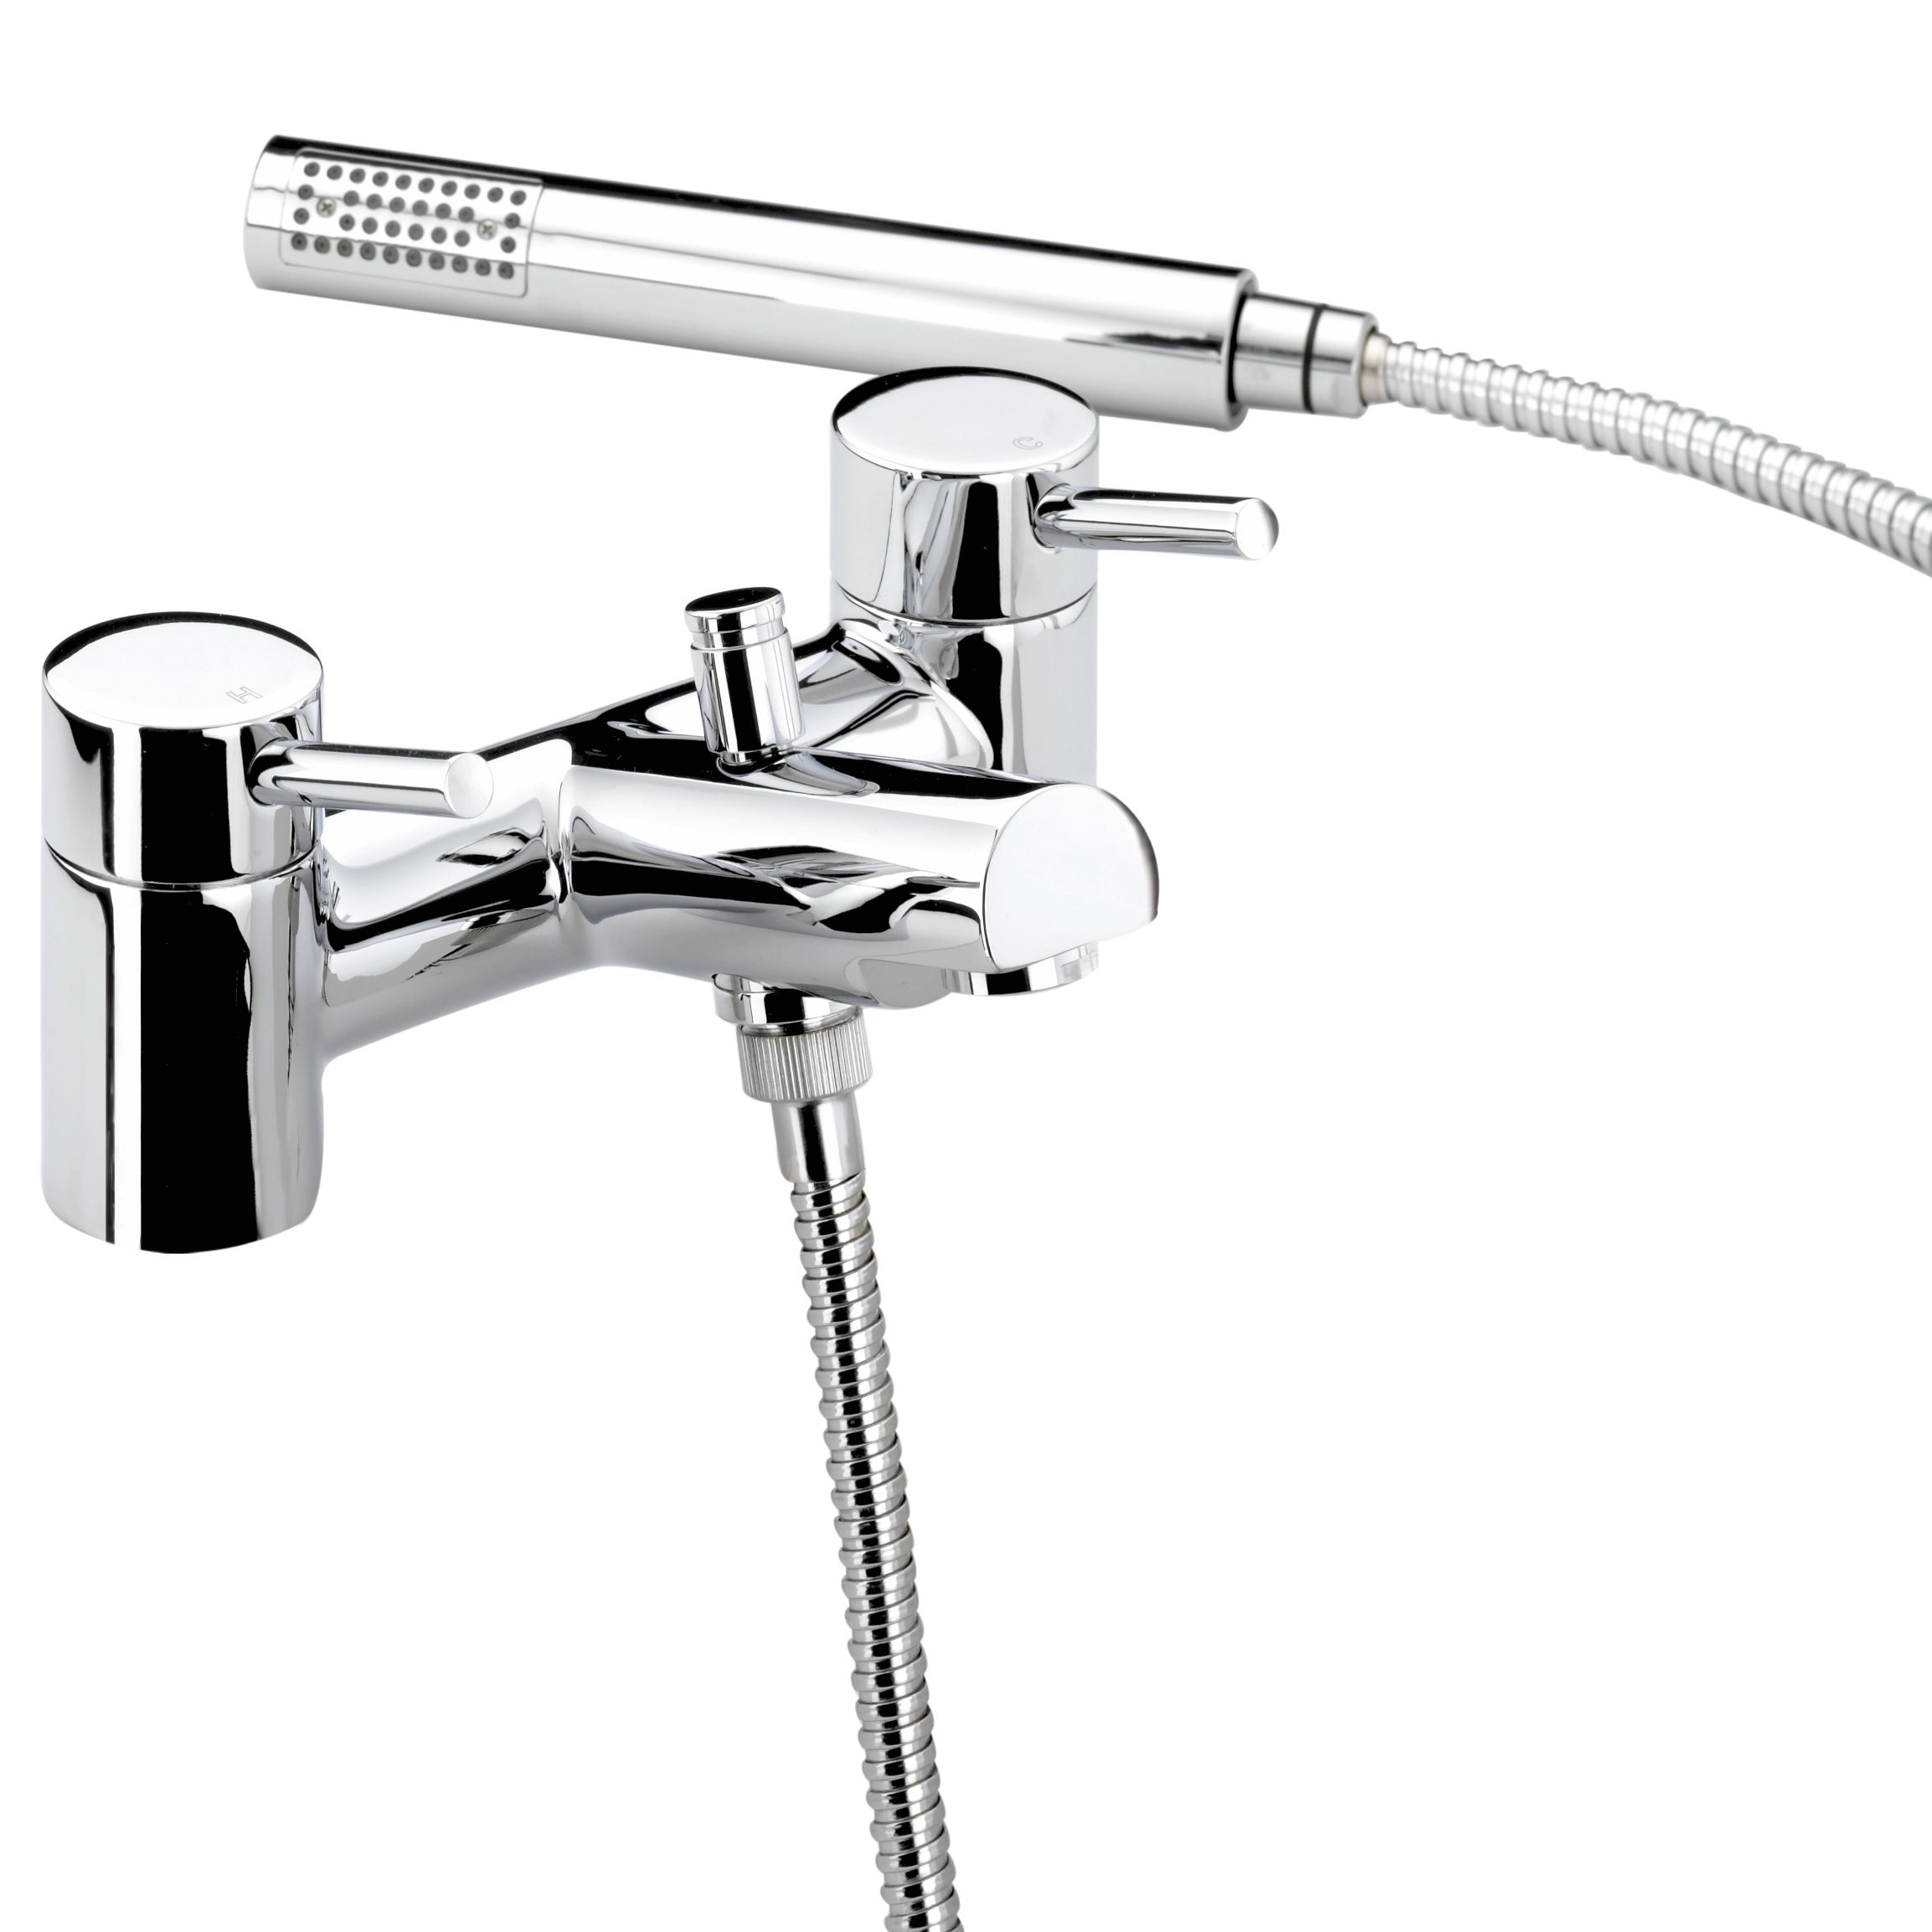 Prism Bath and Shower Mixer